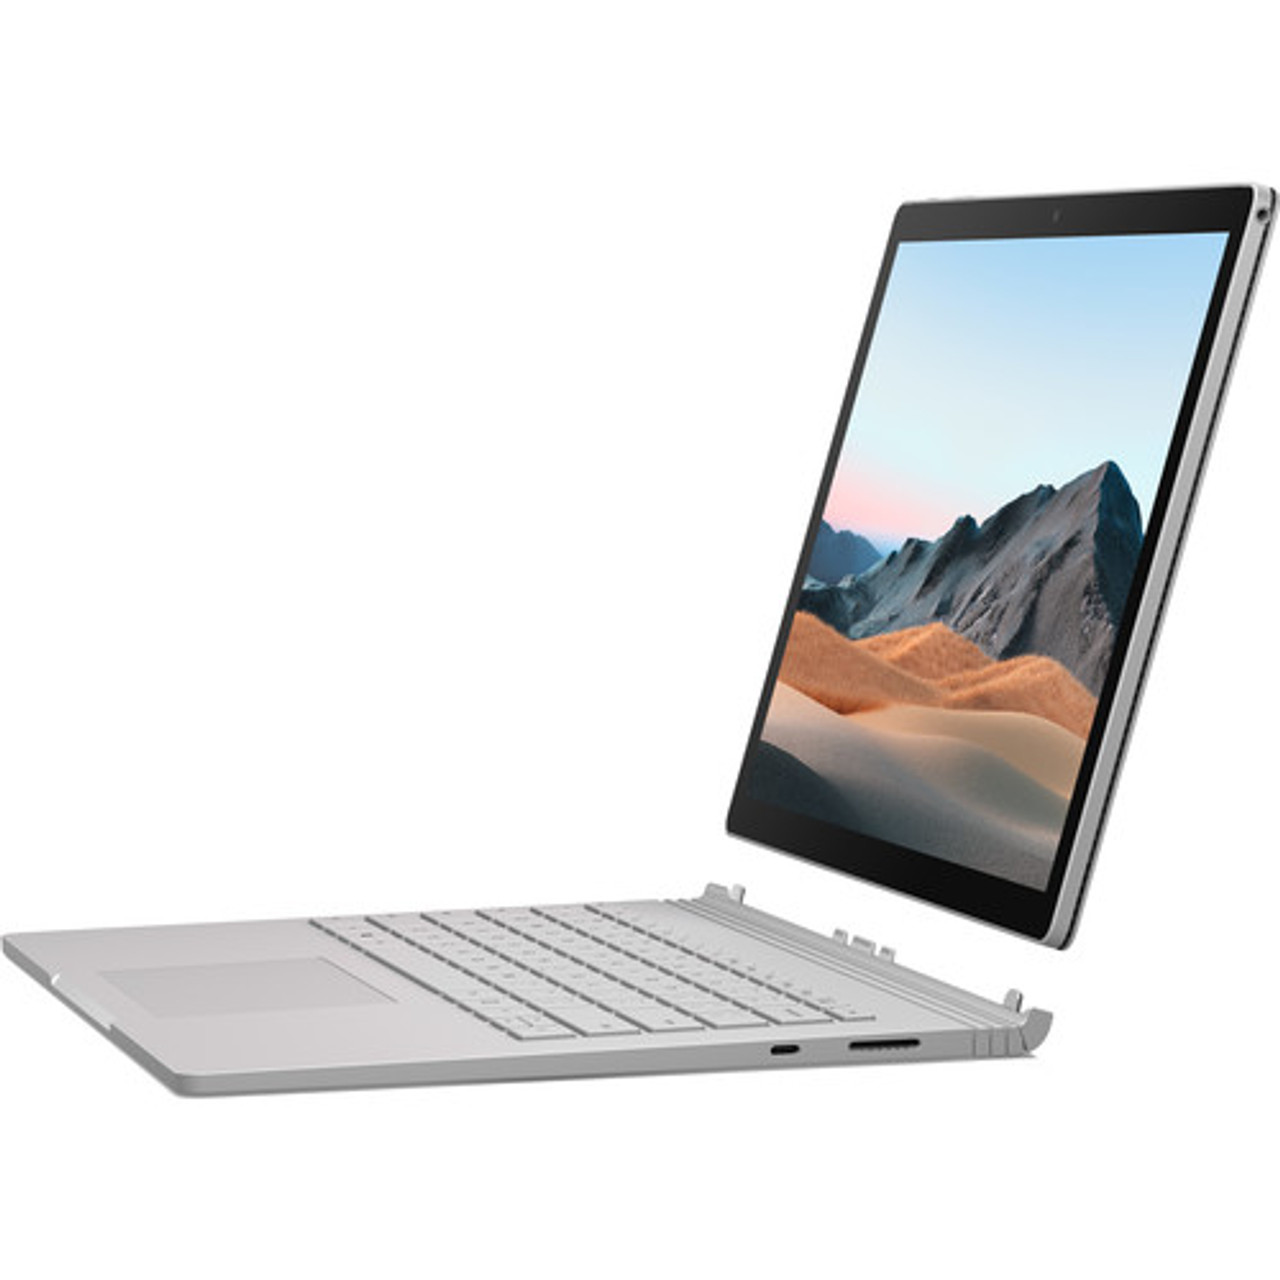 Surface Book Core i7 8GB SSD 256GB